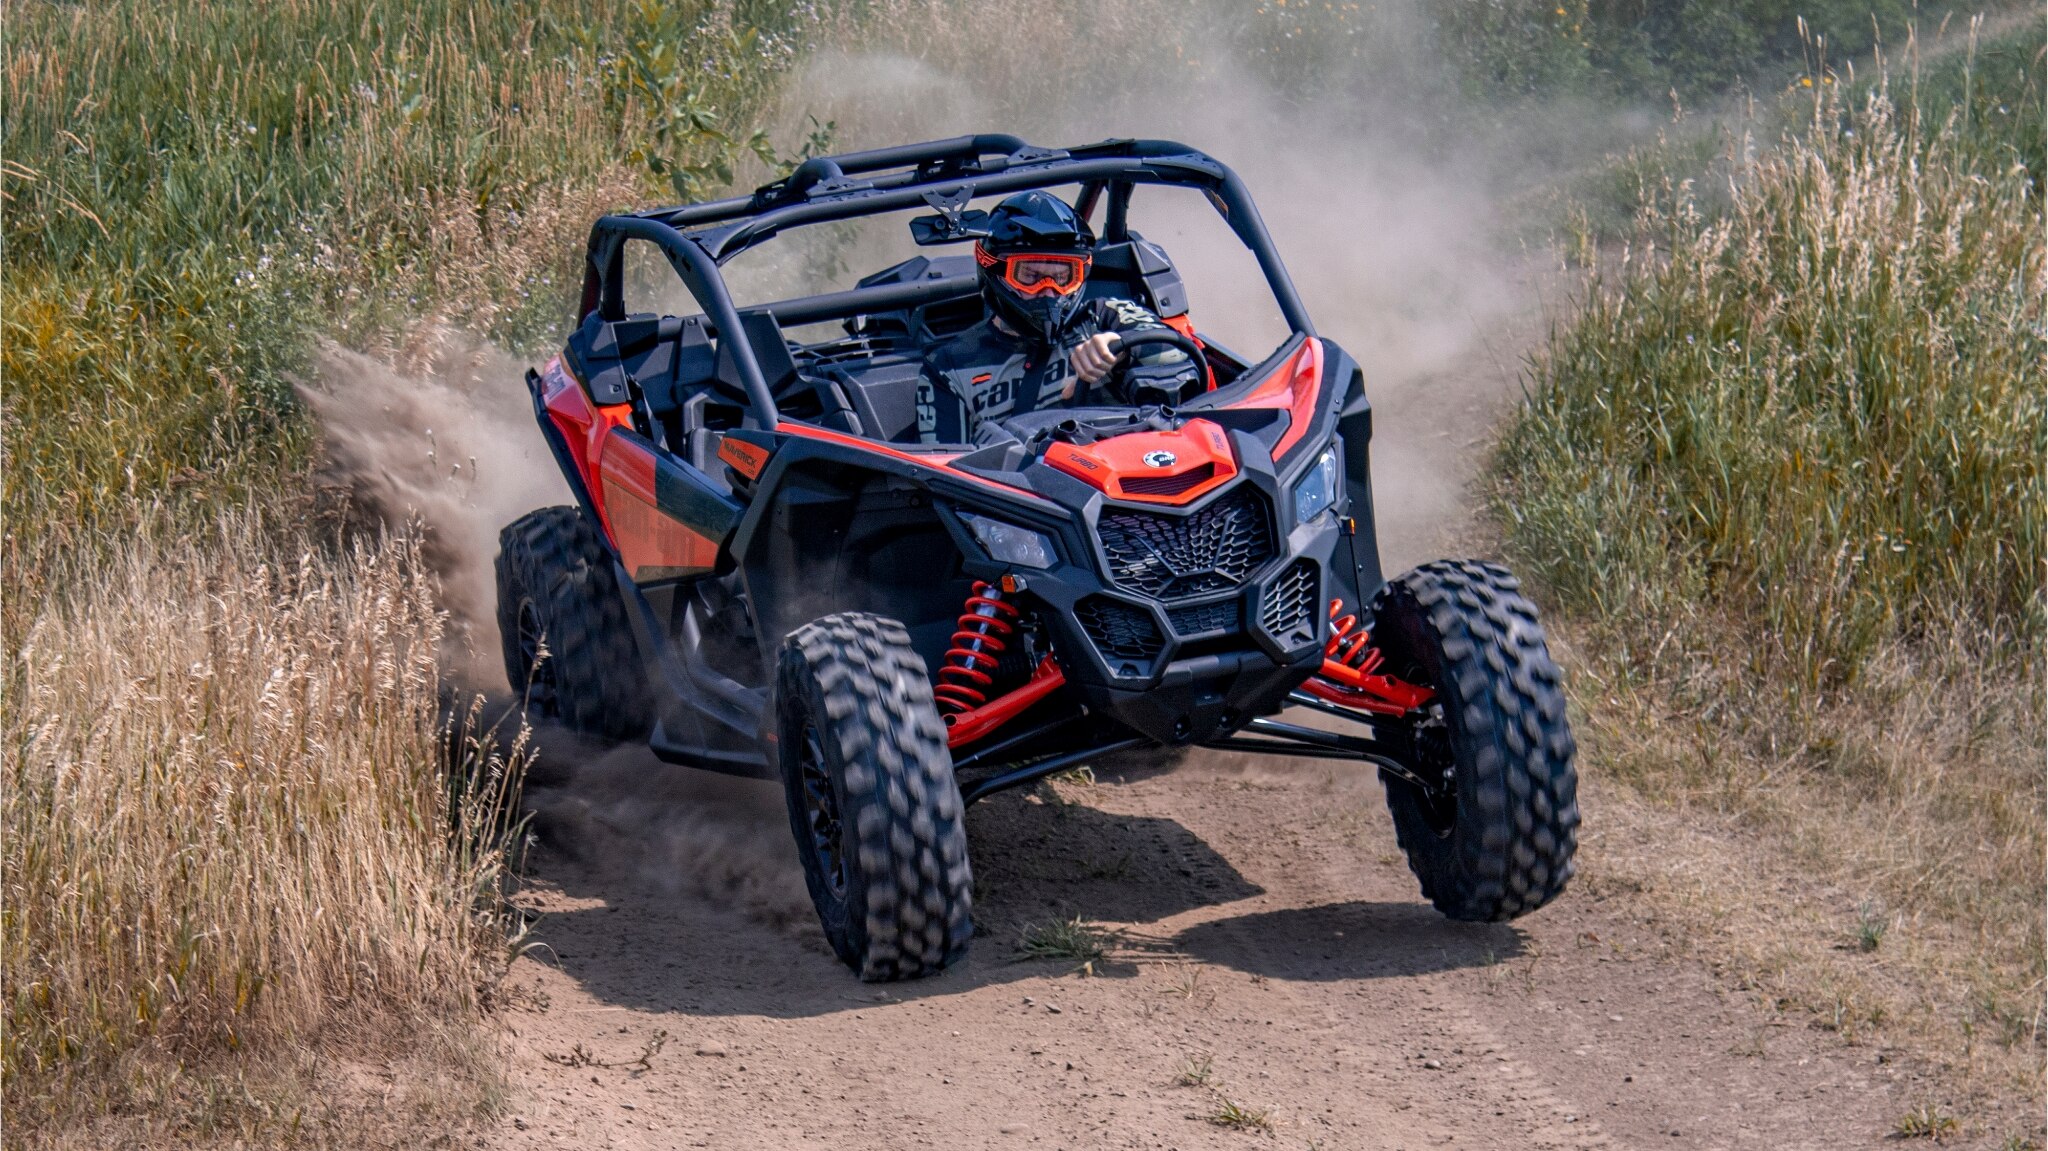 Trailer of the 2023 new Can-Am Off-Road lineup